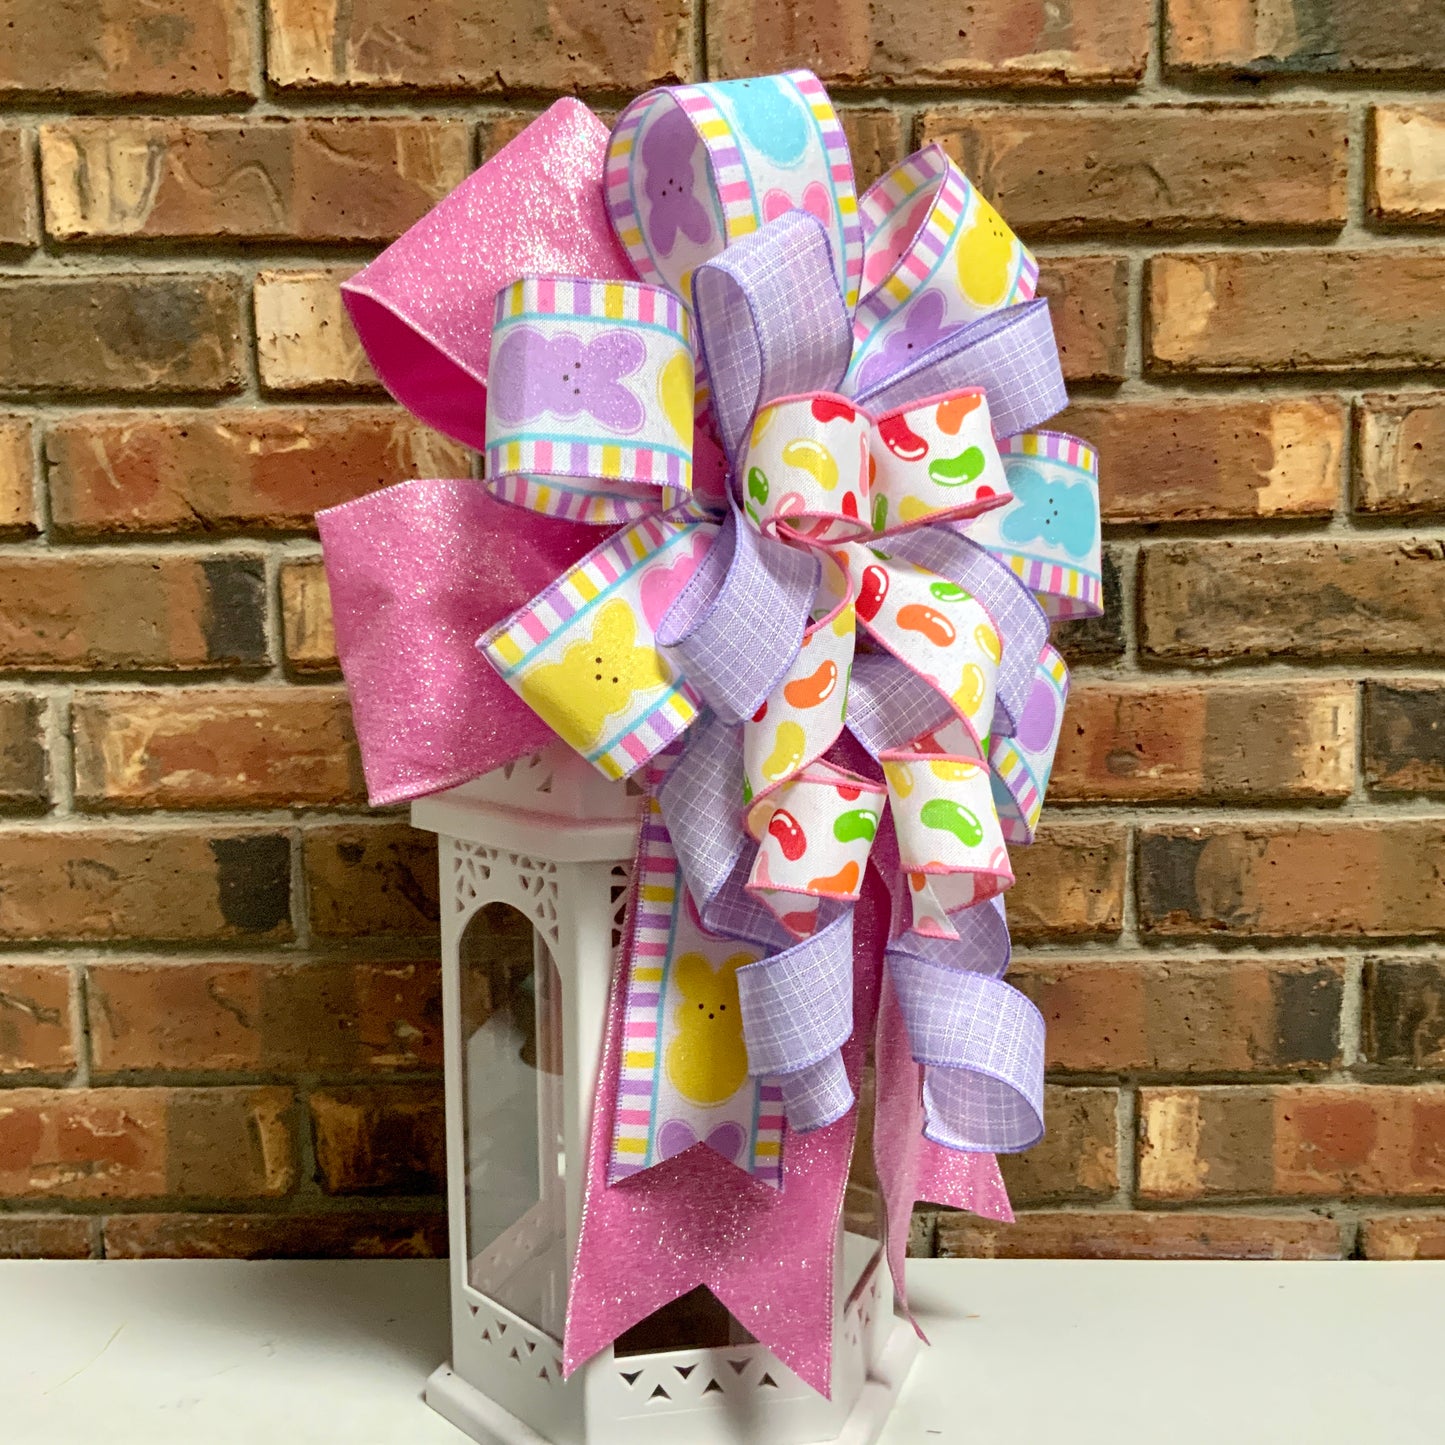 Easter Bow, Easter Peeps Bow, Easter Bunny Bow, Easter Lantern Bow, Easter Mailbox Bow, Easter Bow For Wreath